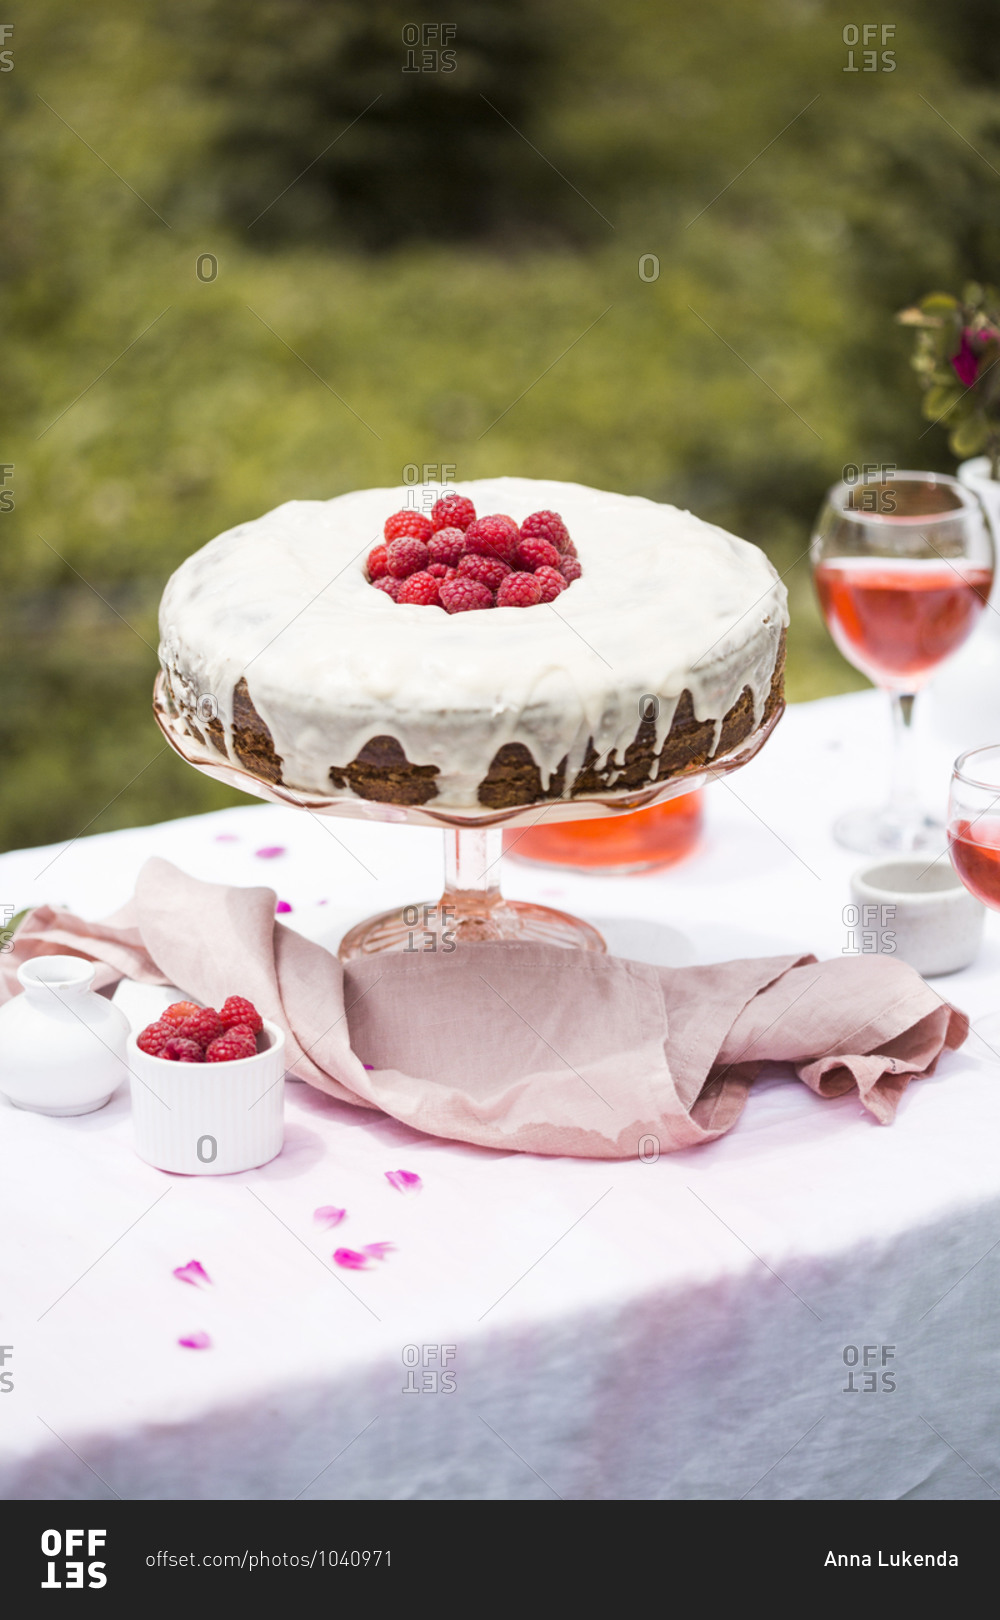 Carrot cake with raspberries on an outdoor table